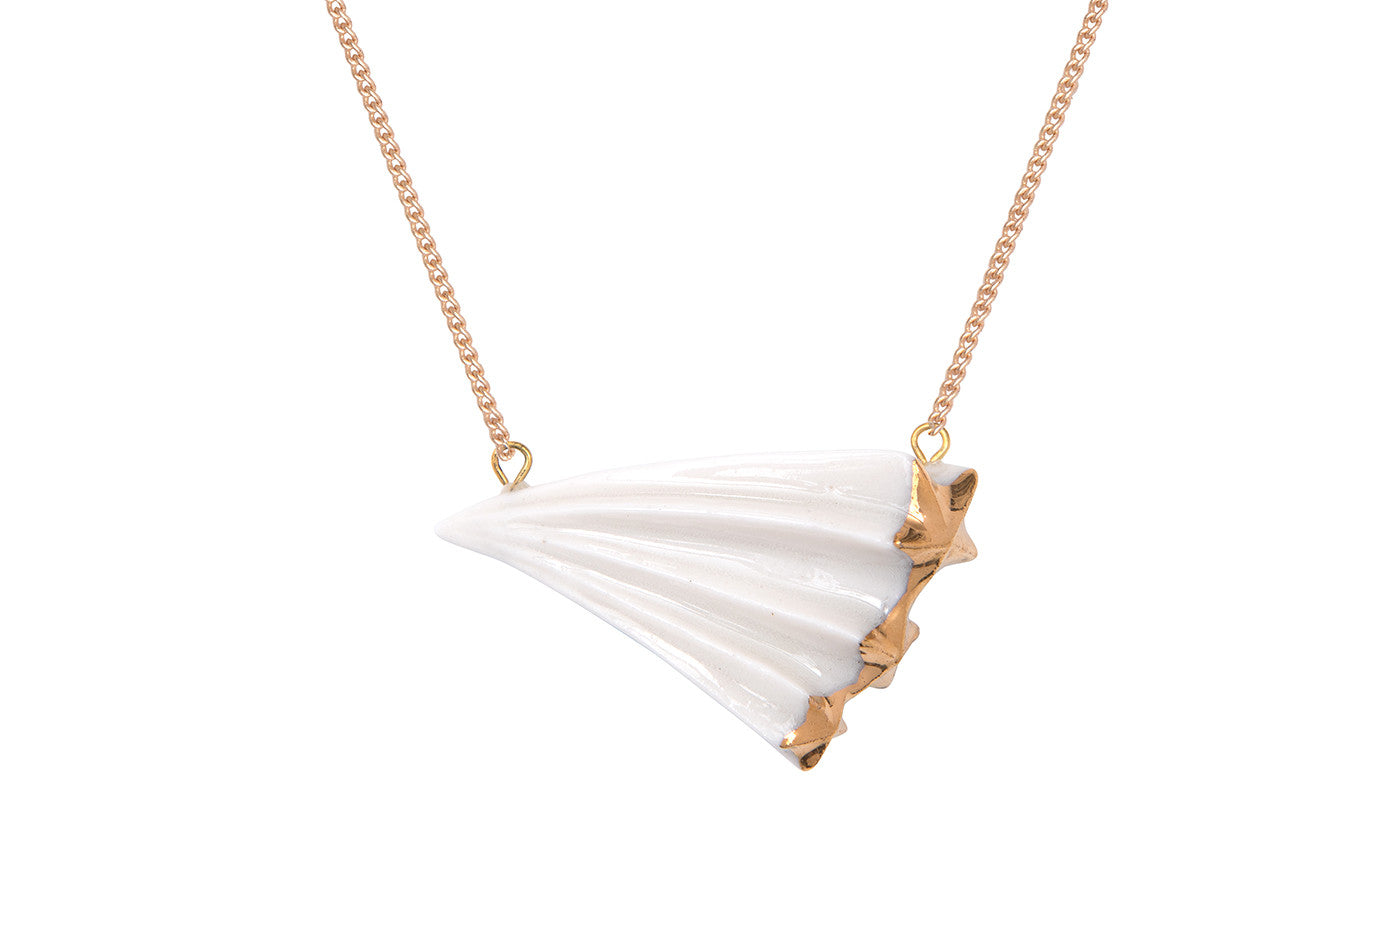 Autumn Sale - Shooting Star Necklace